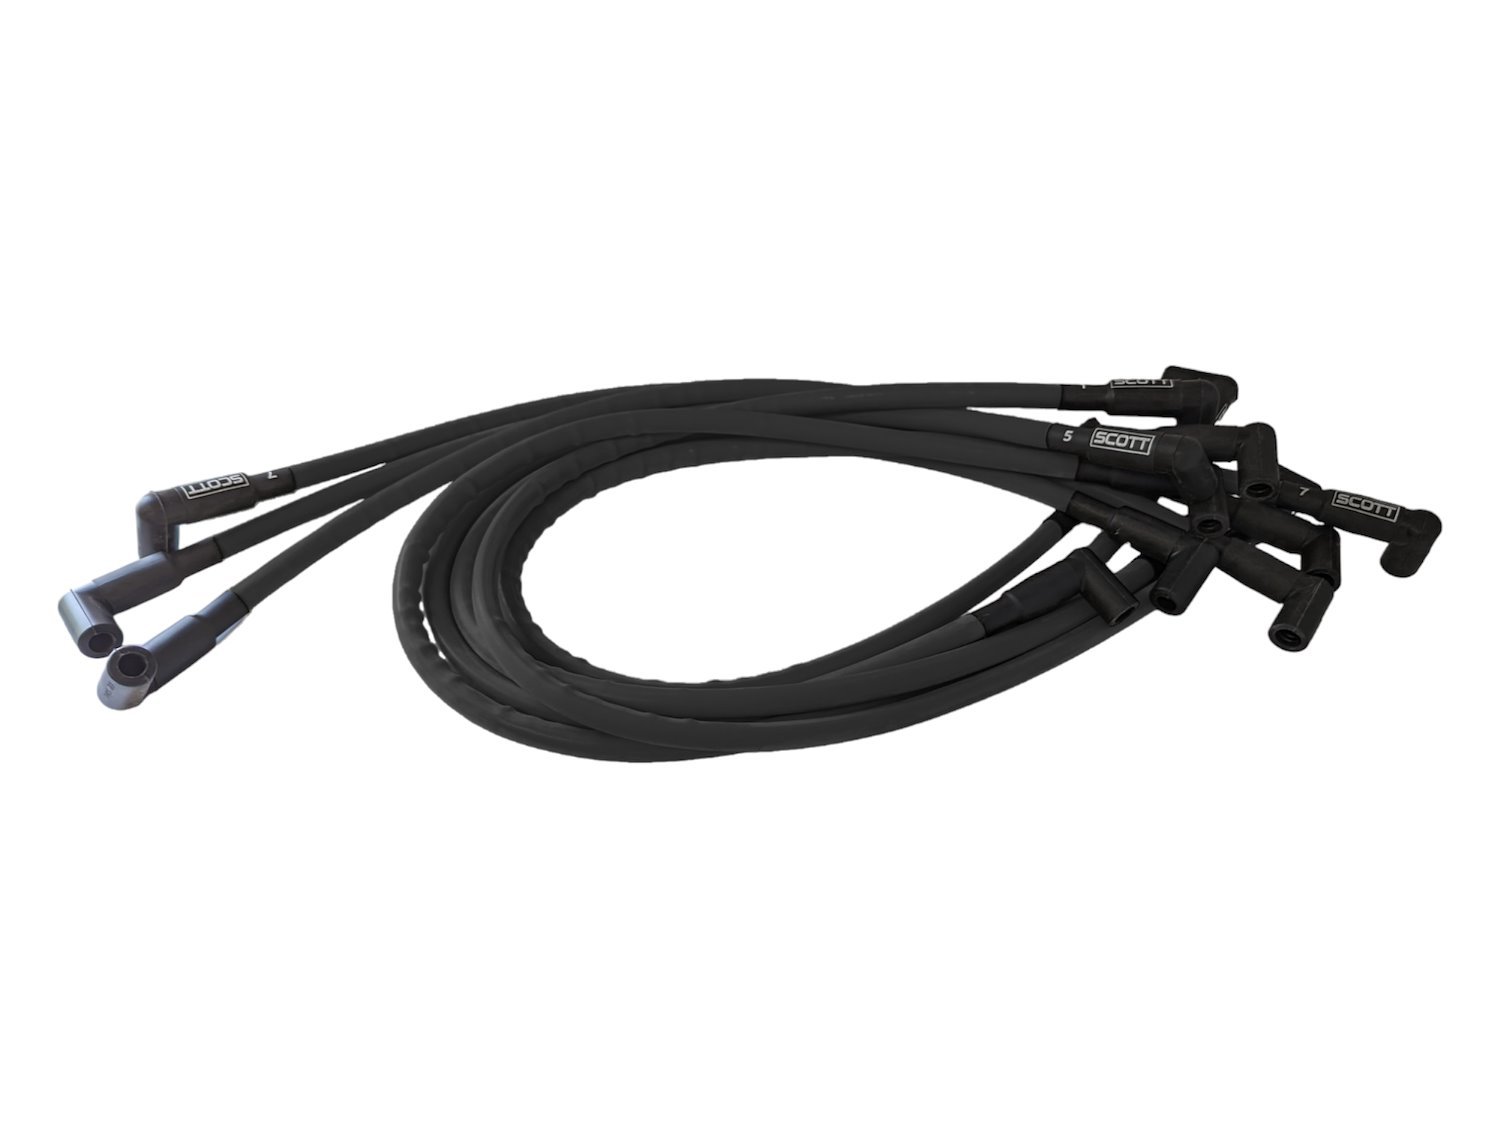 SPW-CH-530-1 High-Performance Silicone-Sleeved Spark Plug Wire Set for Big Block Ford, Under Header [Black]